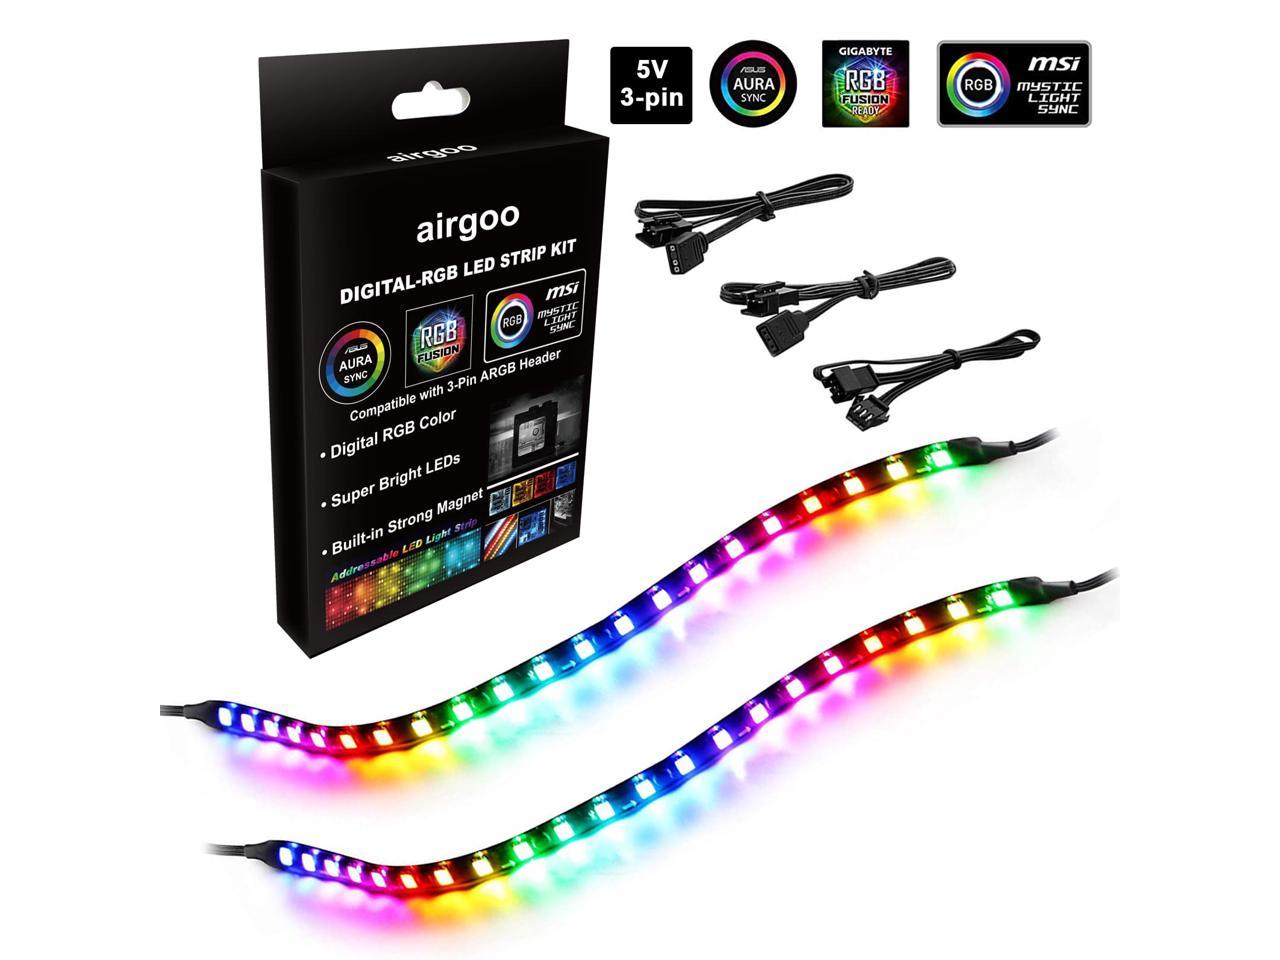 Airgoo RGB PC LED Light Strips, 2x13.8in RGBIC Rainbow Magnetic ARGB Strip for PC Case Lighting, for 5V 3-pin ASUS SYNC, RGB Fusion, MSI Mystic Light Sync Motherboard -